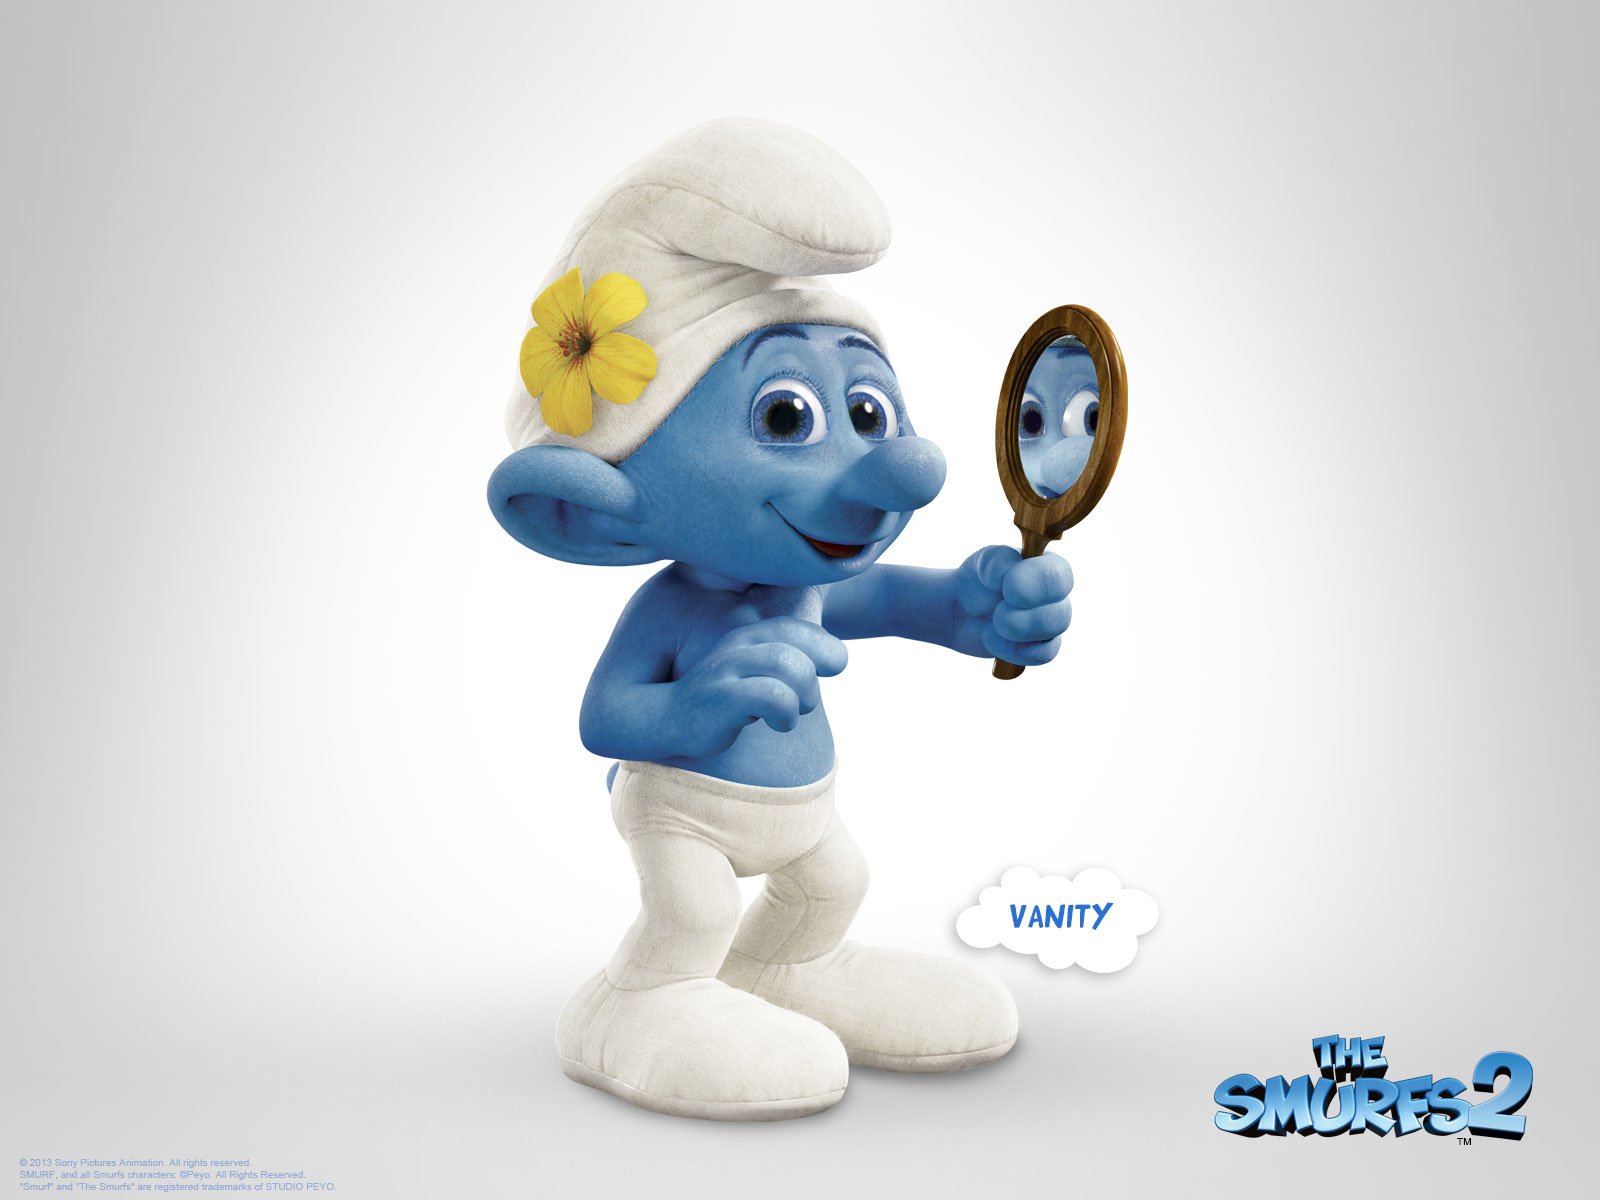 The Smurfs 2 2013 - Rotten Tomatoes